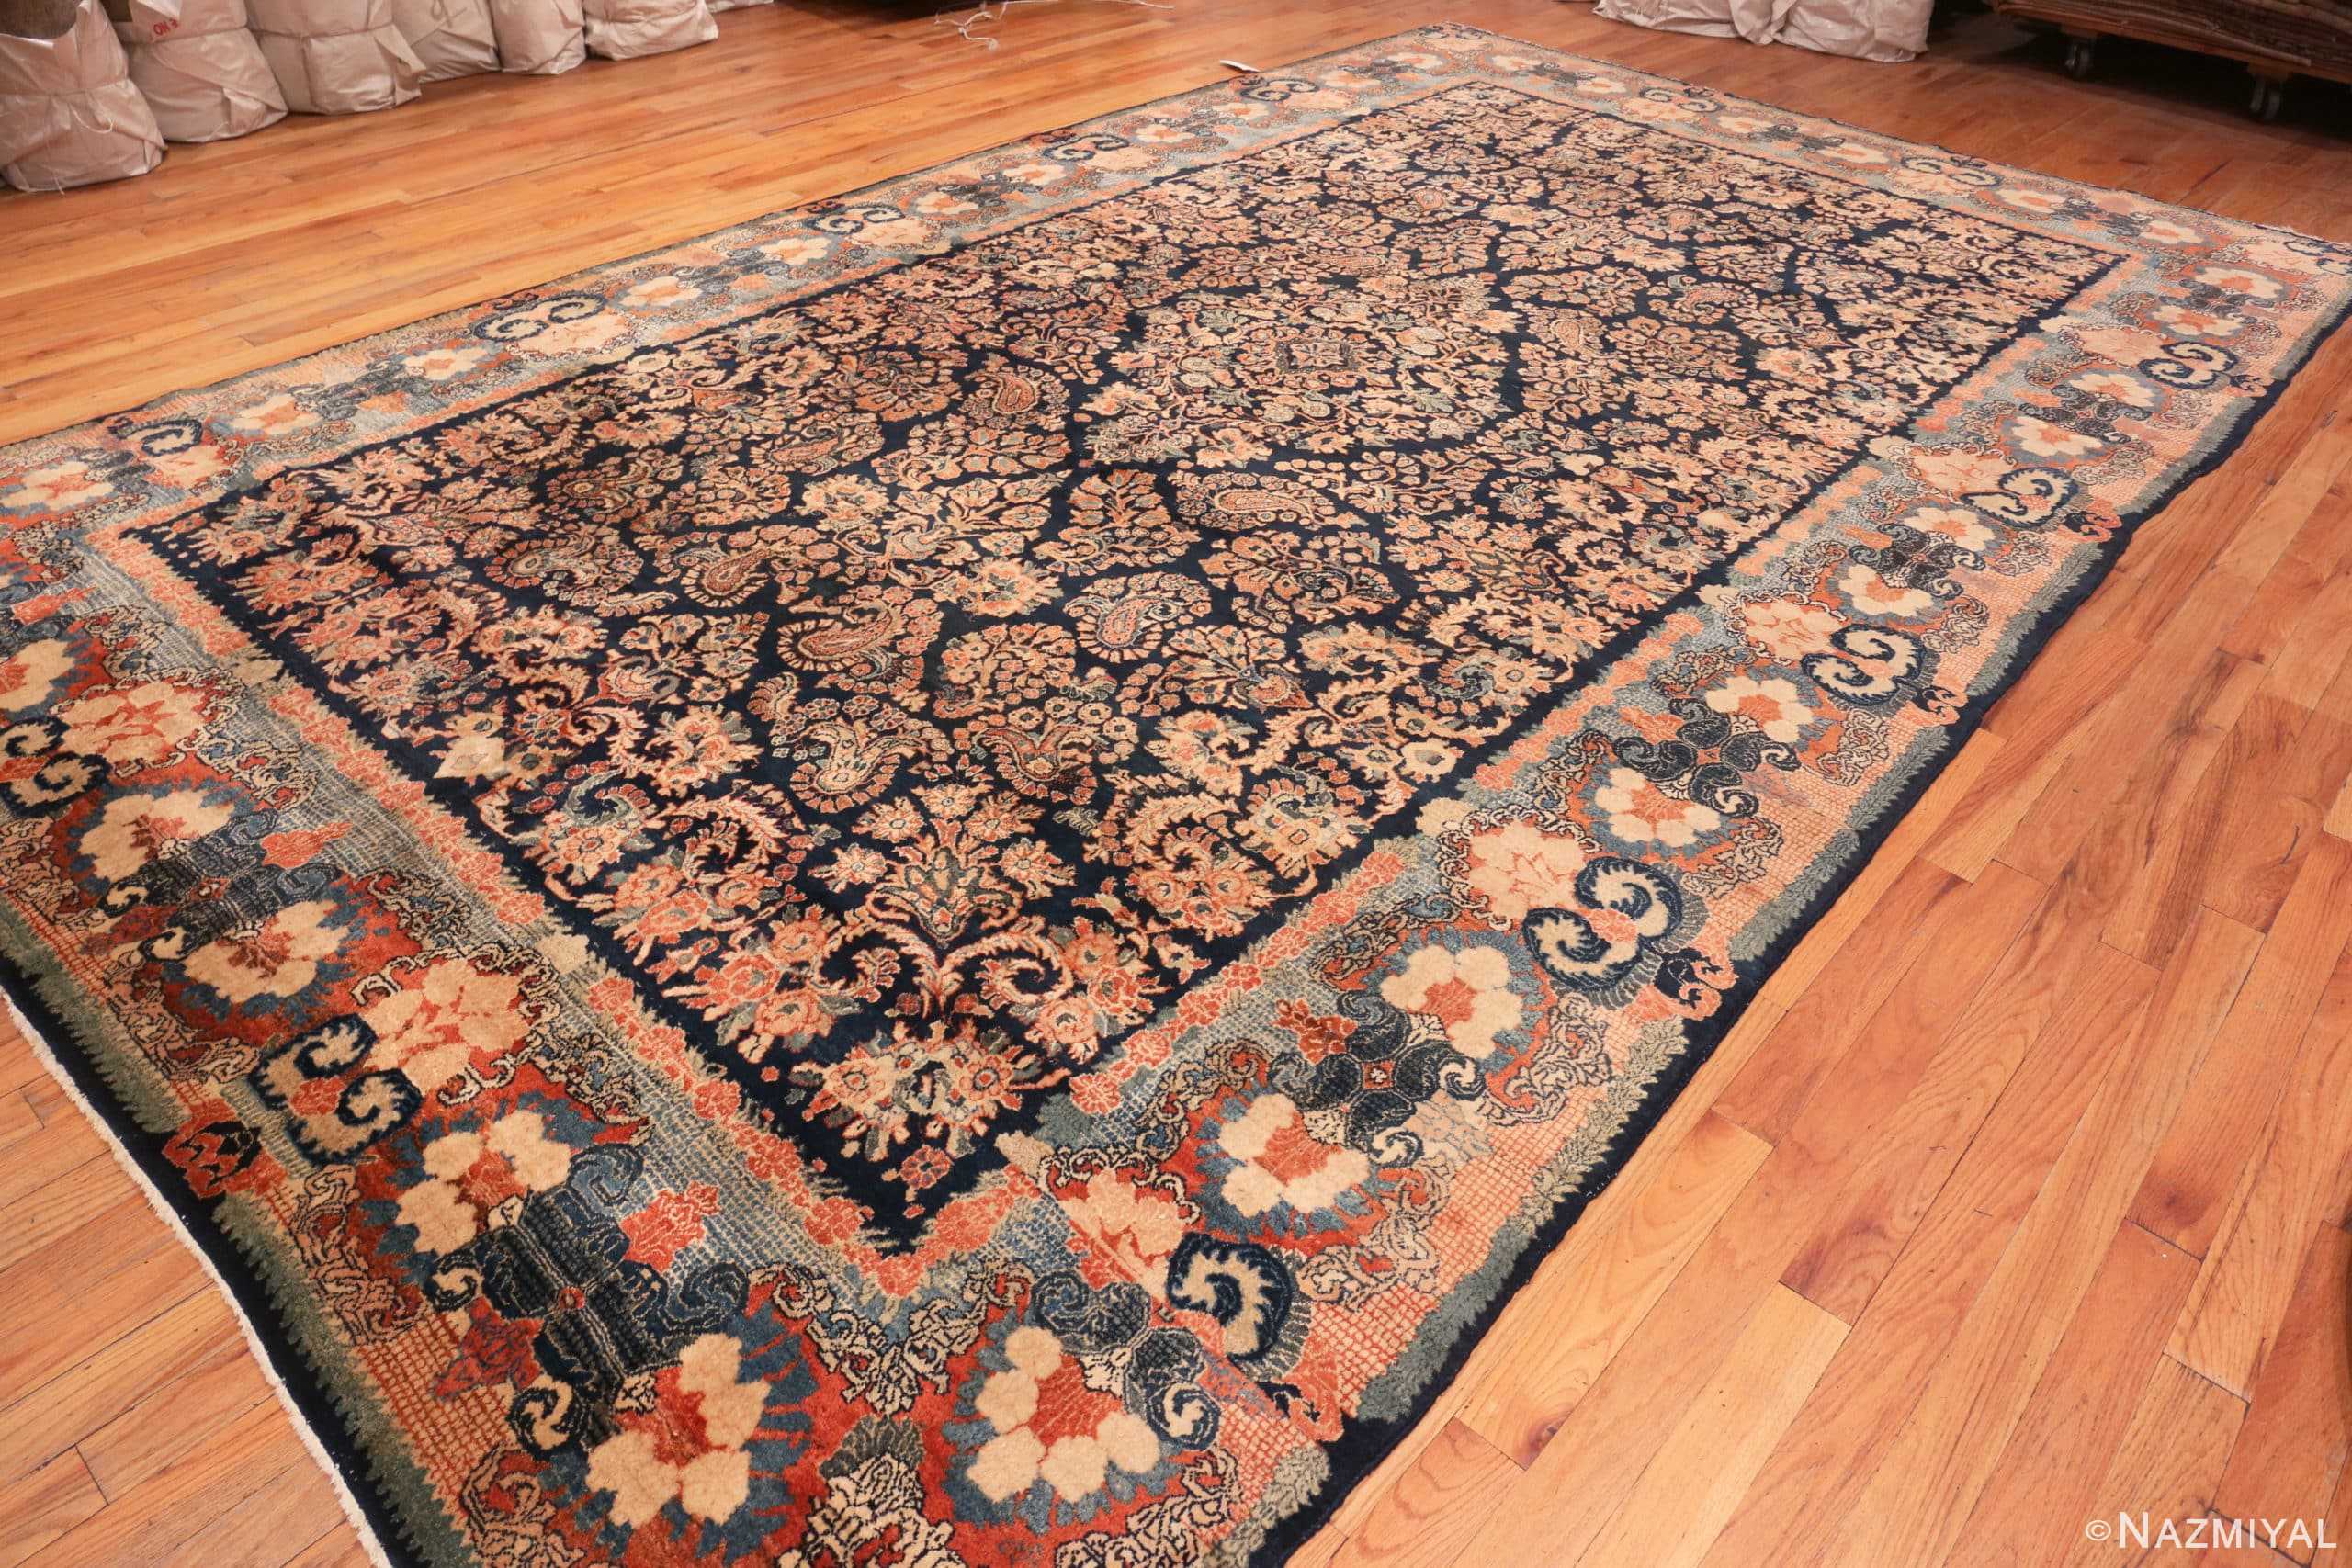 Side Of Large Floral Antique Persian Sarouk Rug 70814 by Nazmiyal Antique Rugs